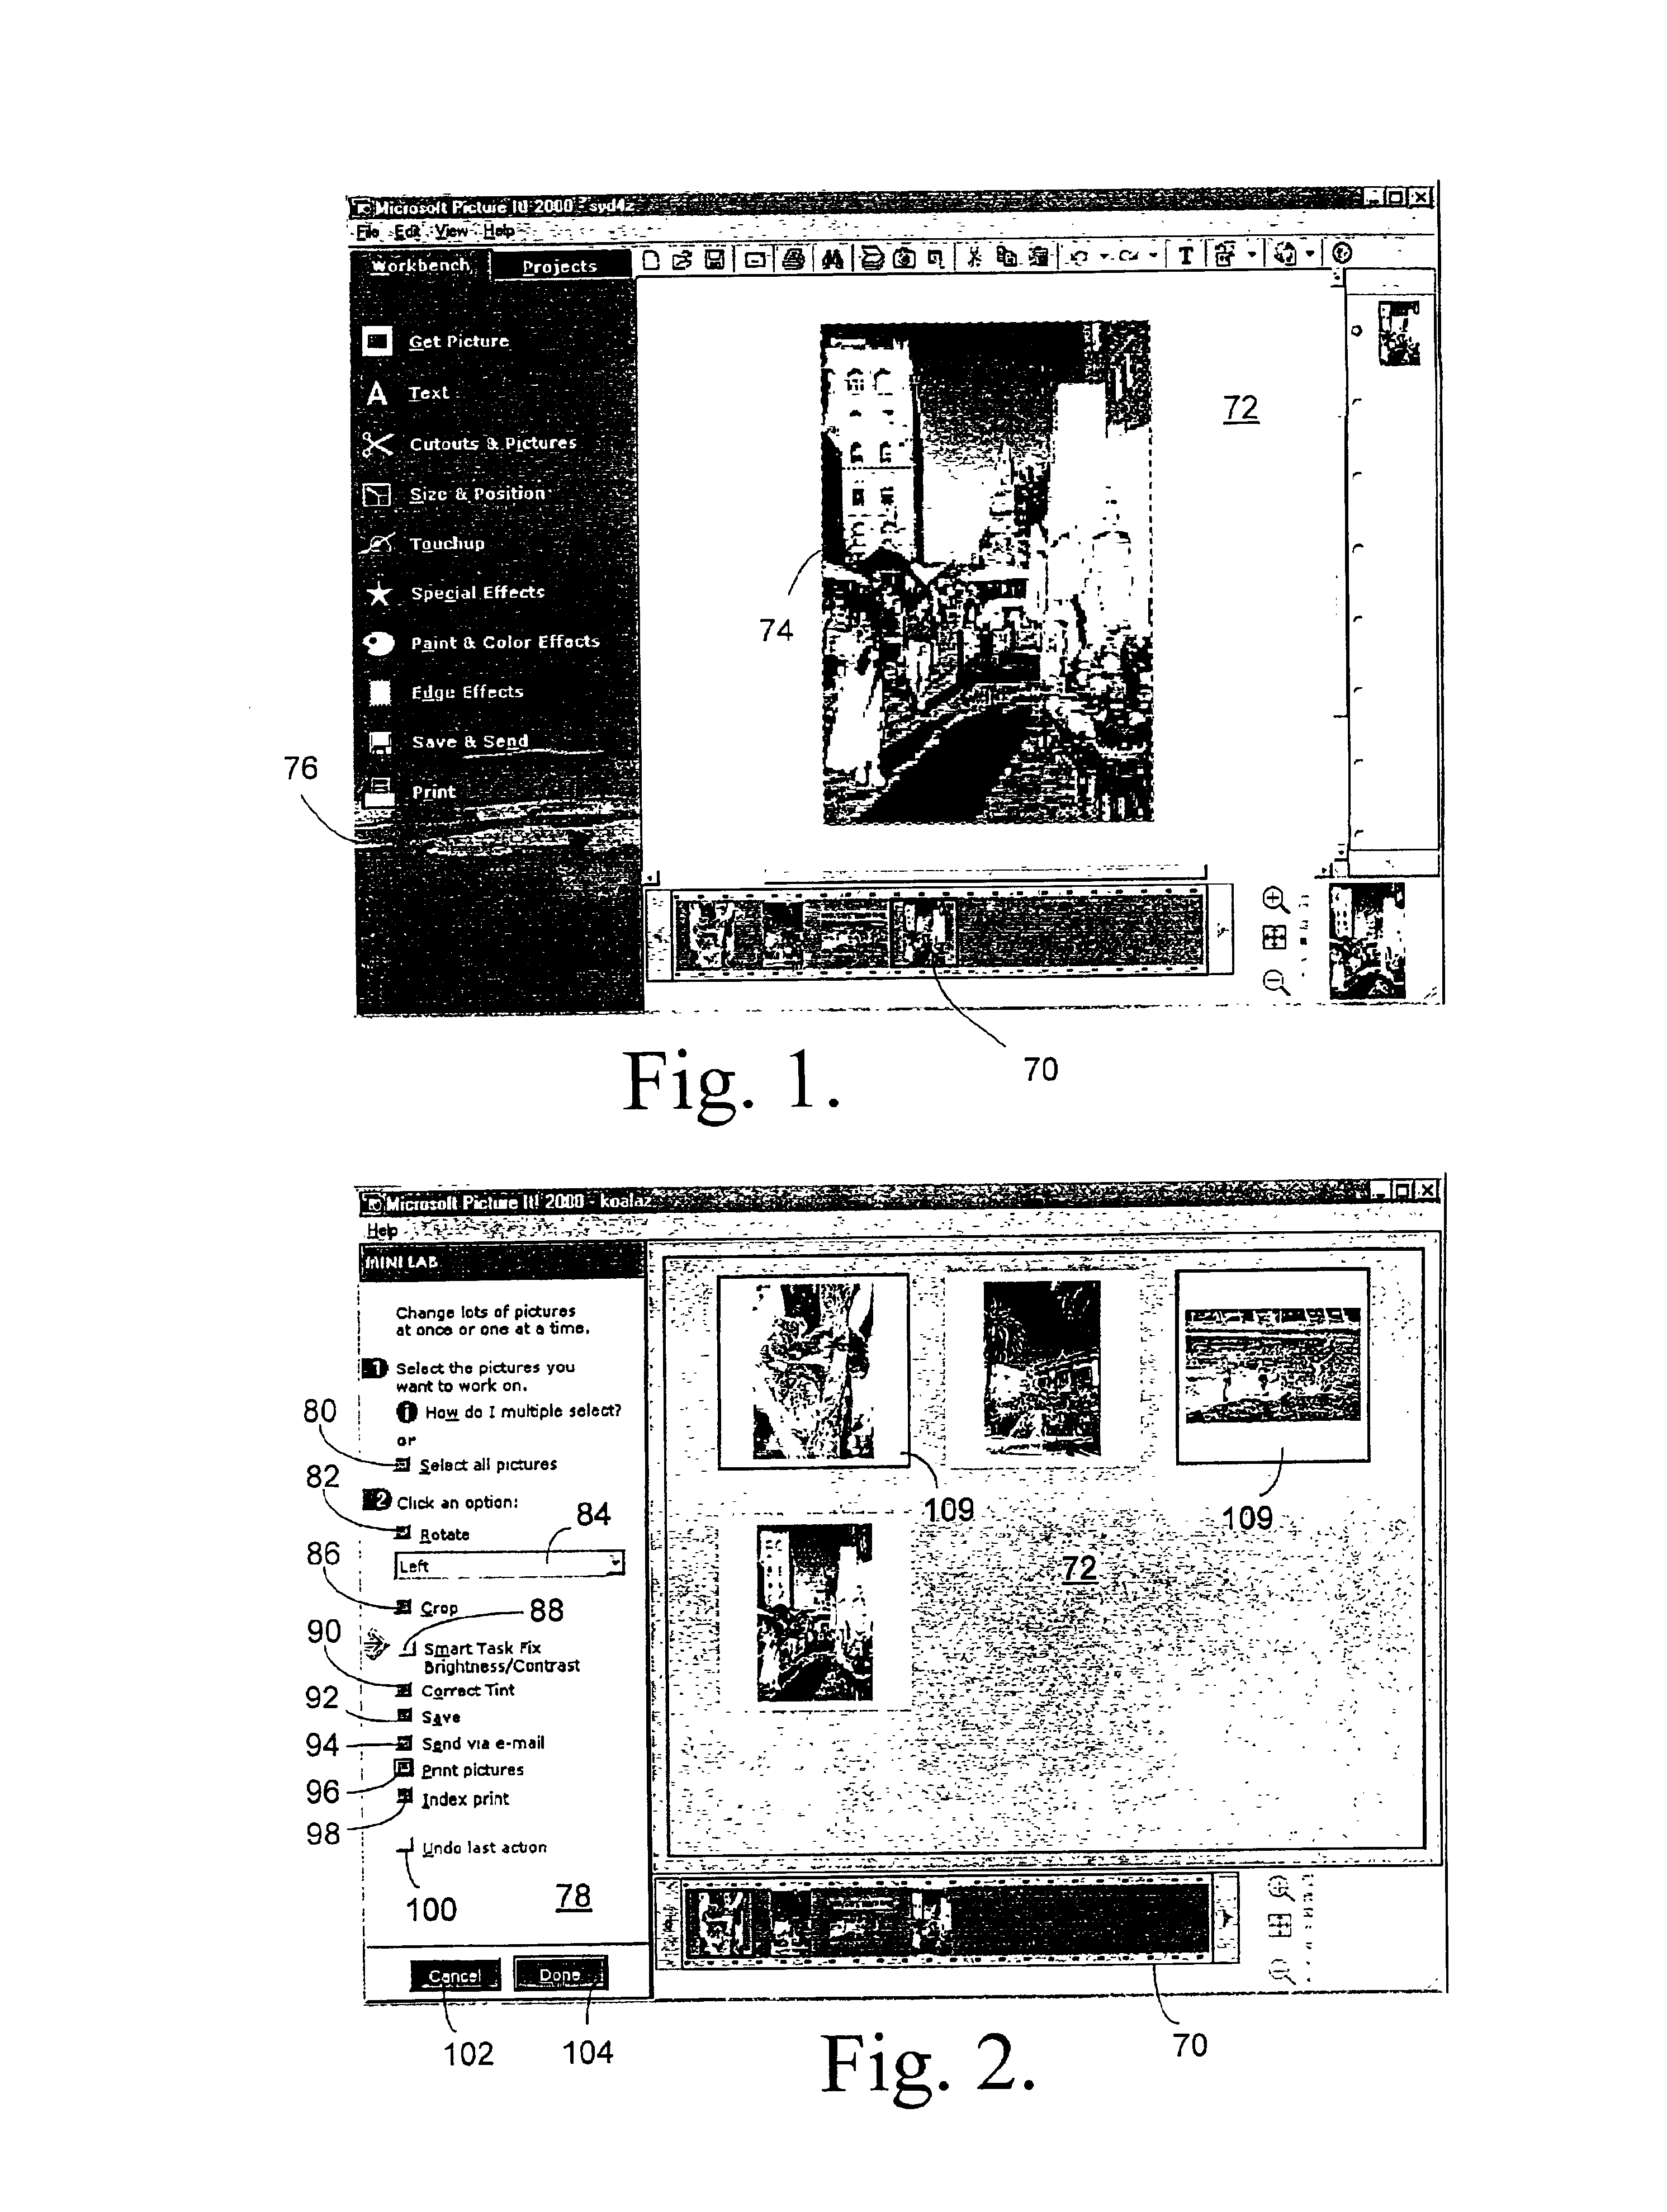 System and method for editing digitally represented still images